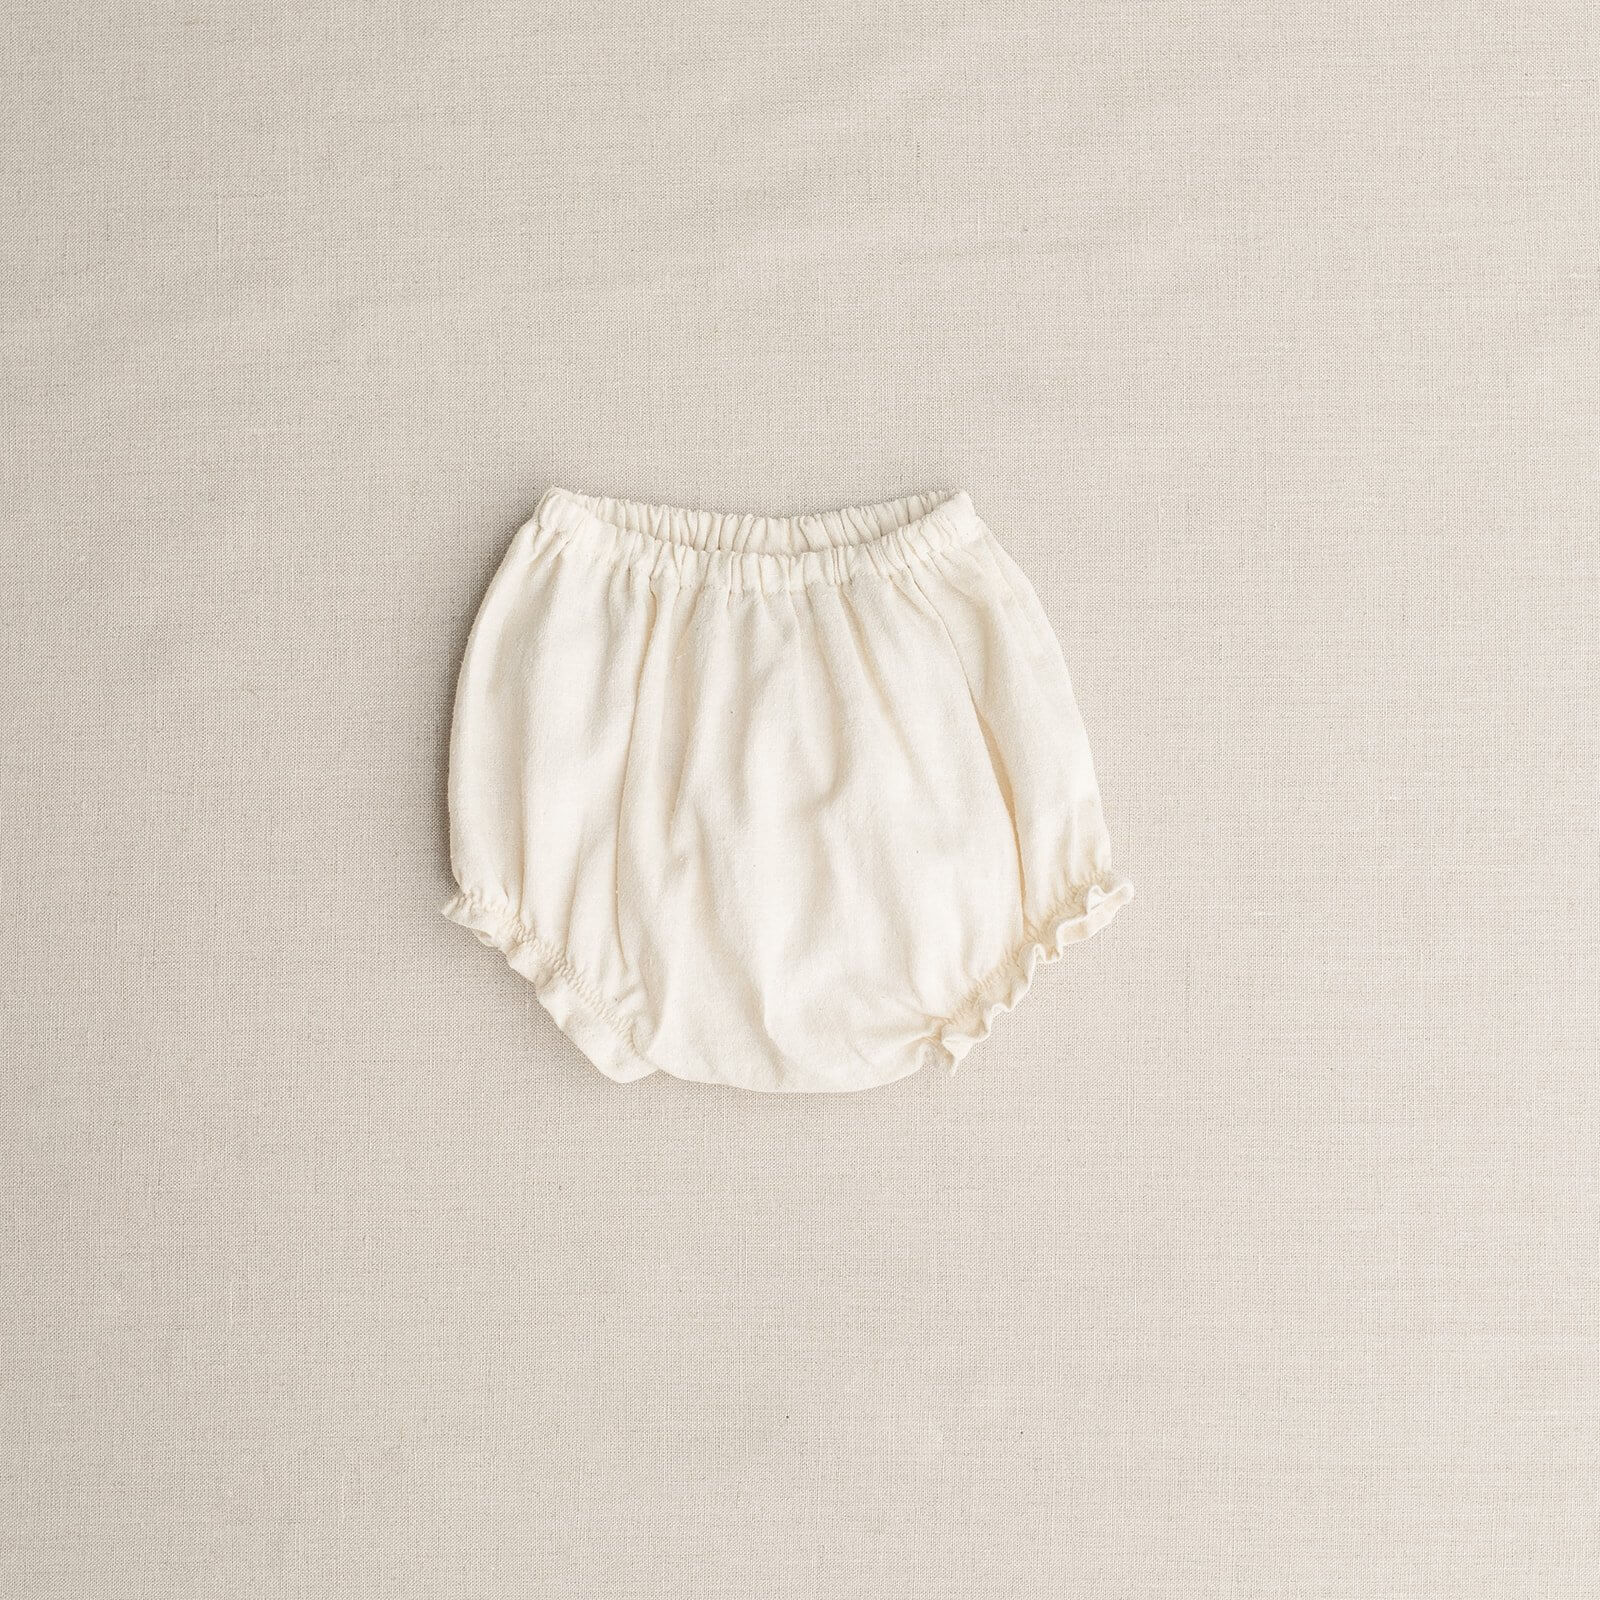 Organic Classic Bloomers - Tortoise & the Hare Clothing